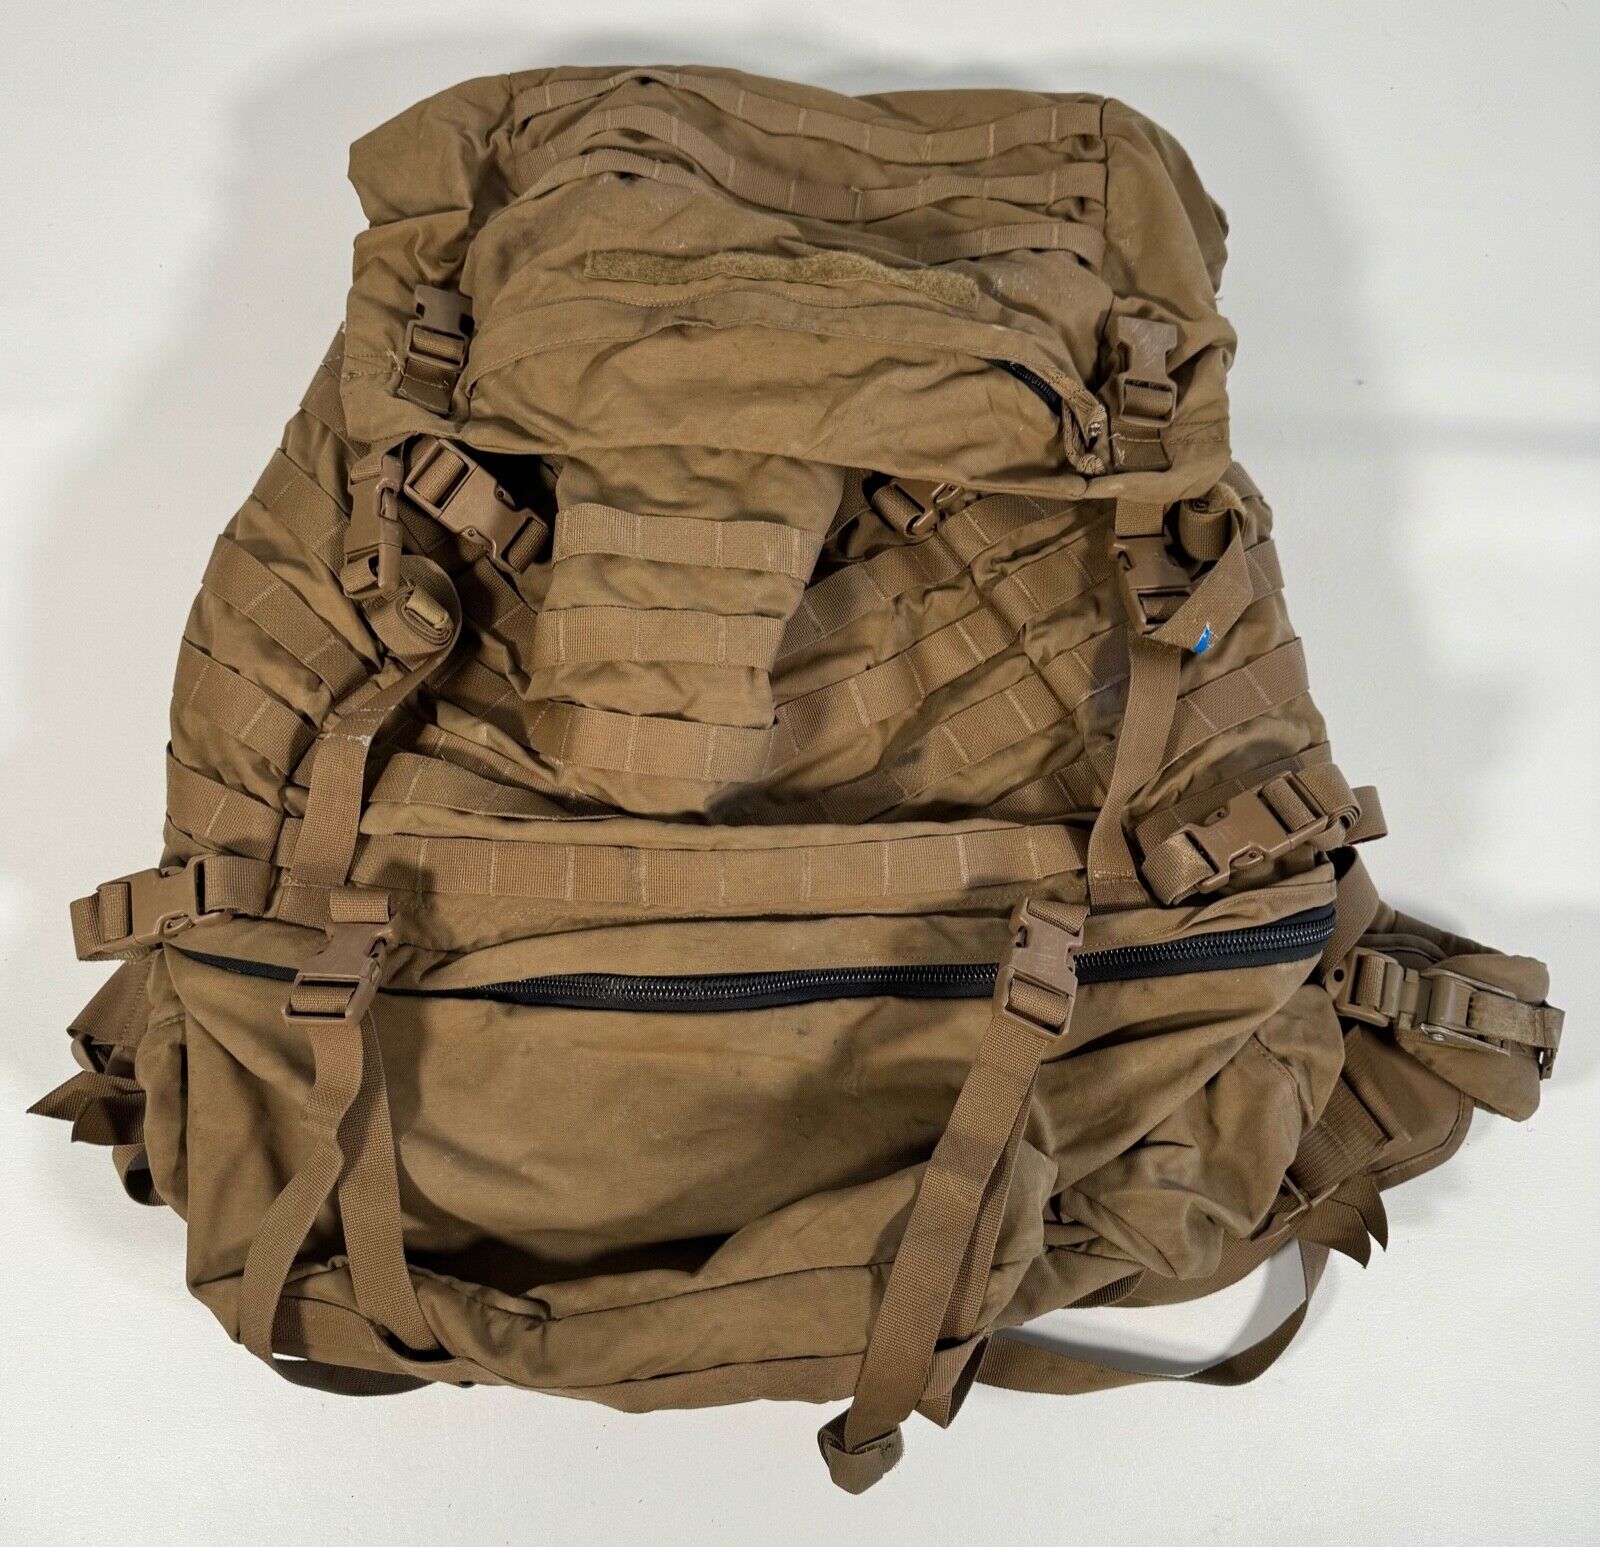 USMC Marine Corps FILBE Main Pack Backpack Rucksack Complete Coyote Brown